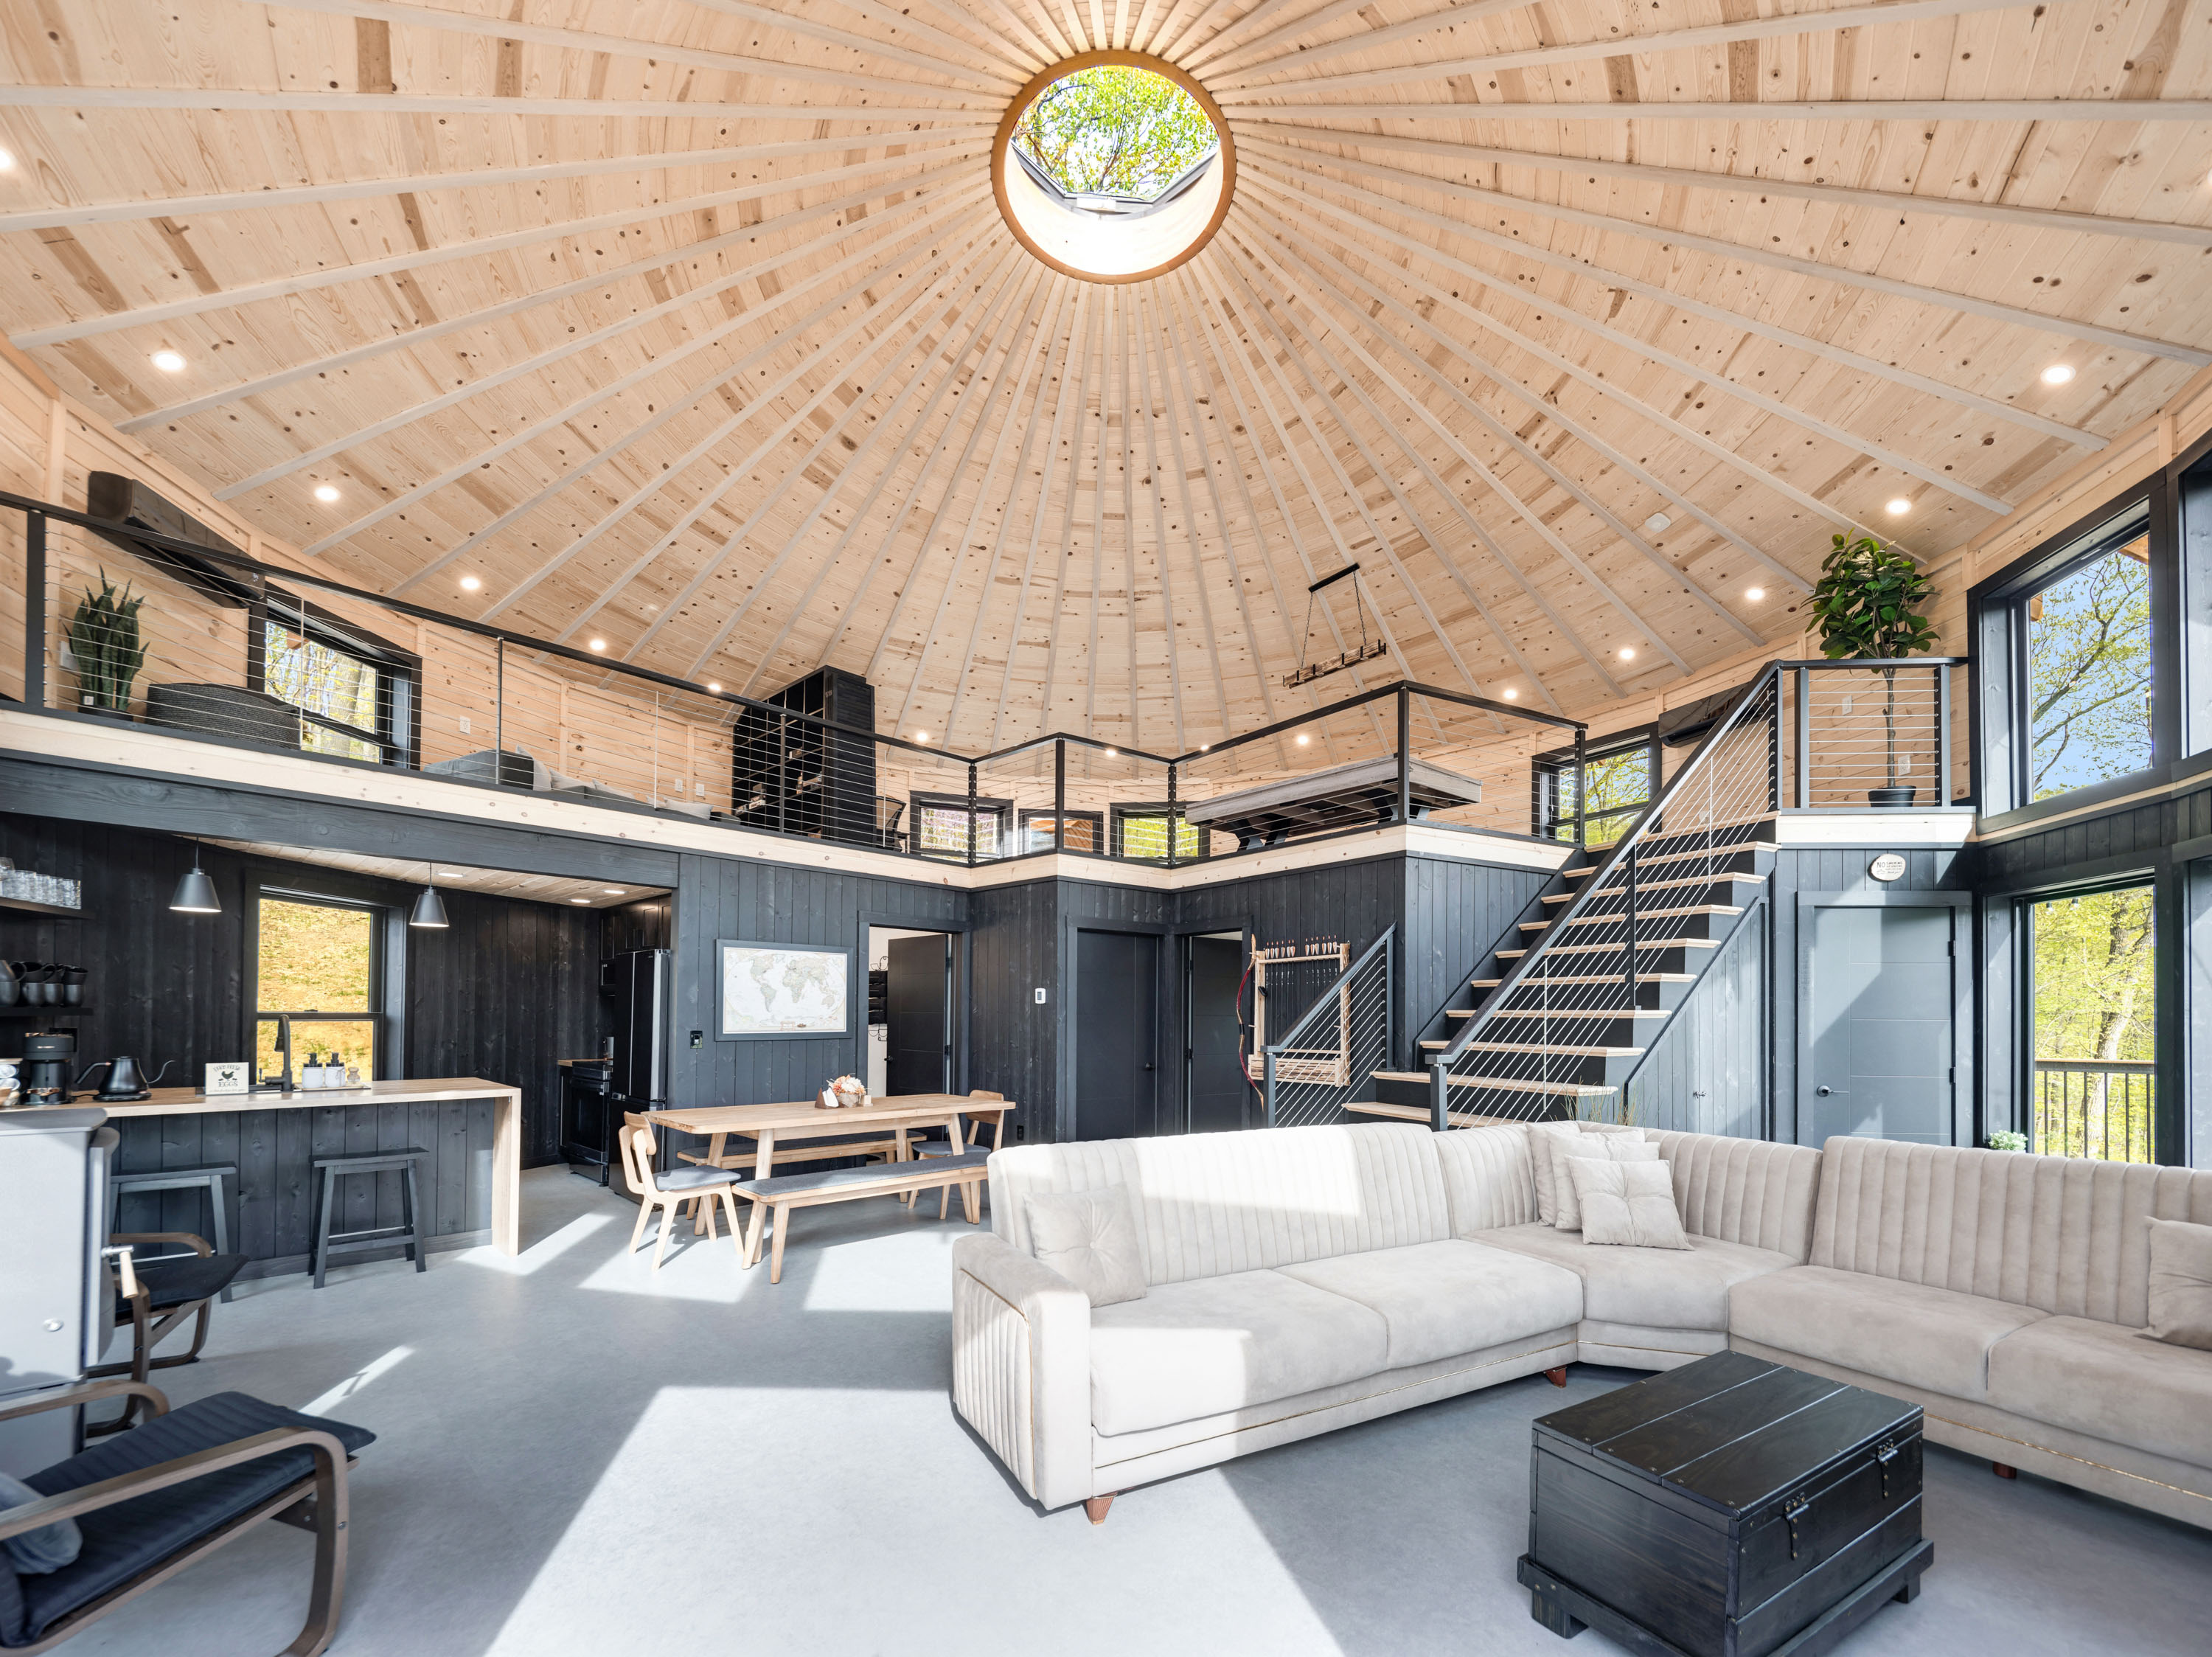 <span  class="uc_style_uc_tiles_grid_image_elementor_uc_items_attribute_title" style="color:#ffffff;">Panoramic Photo, Living Room, Kitchen, Wood Stove, Dining Table, Sofa, Lounge Chairs, Loft, Yurt Ceiling, Pool Table, Modern Black-Yellow Interior - Skyline Yurt</span>